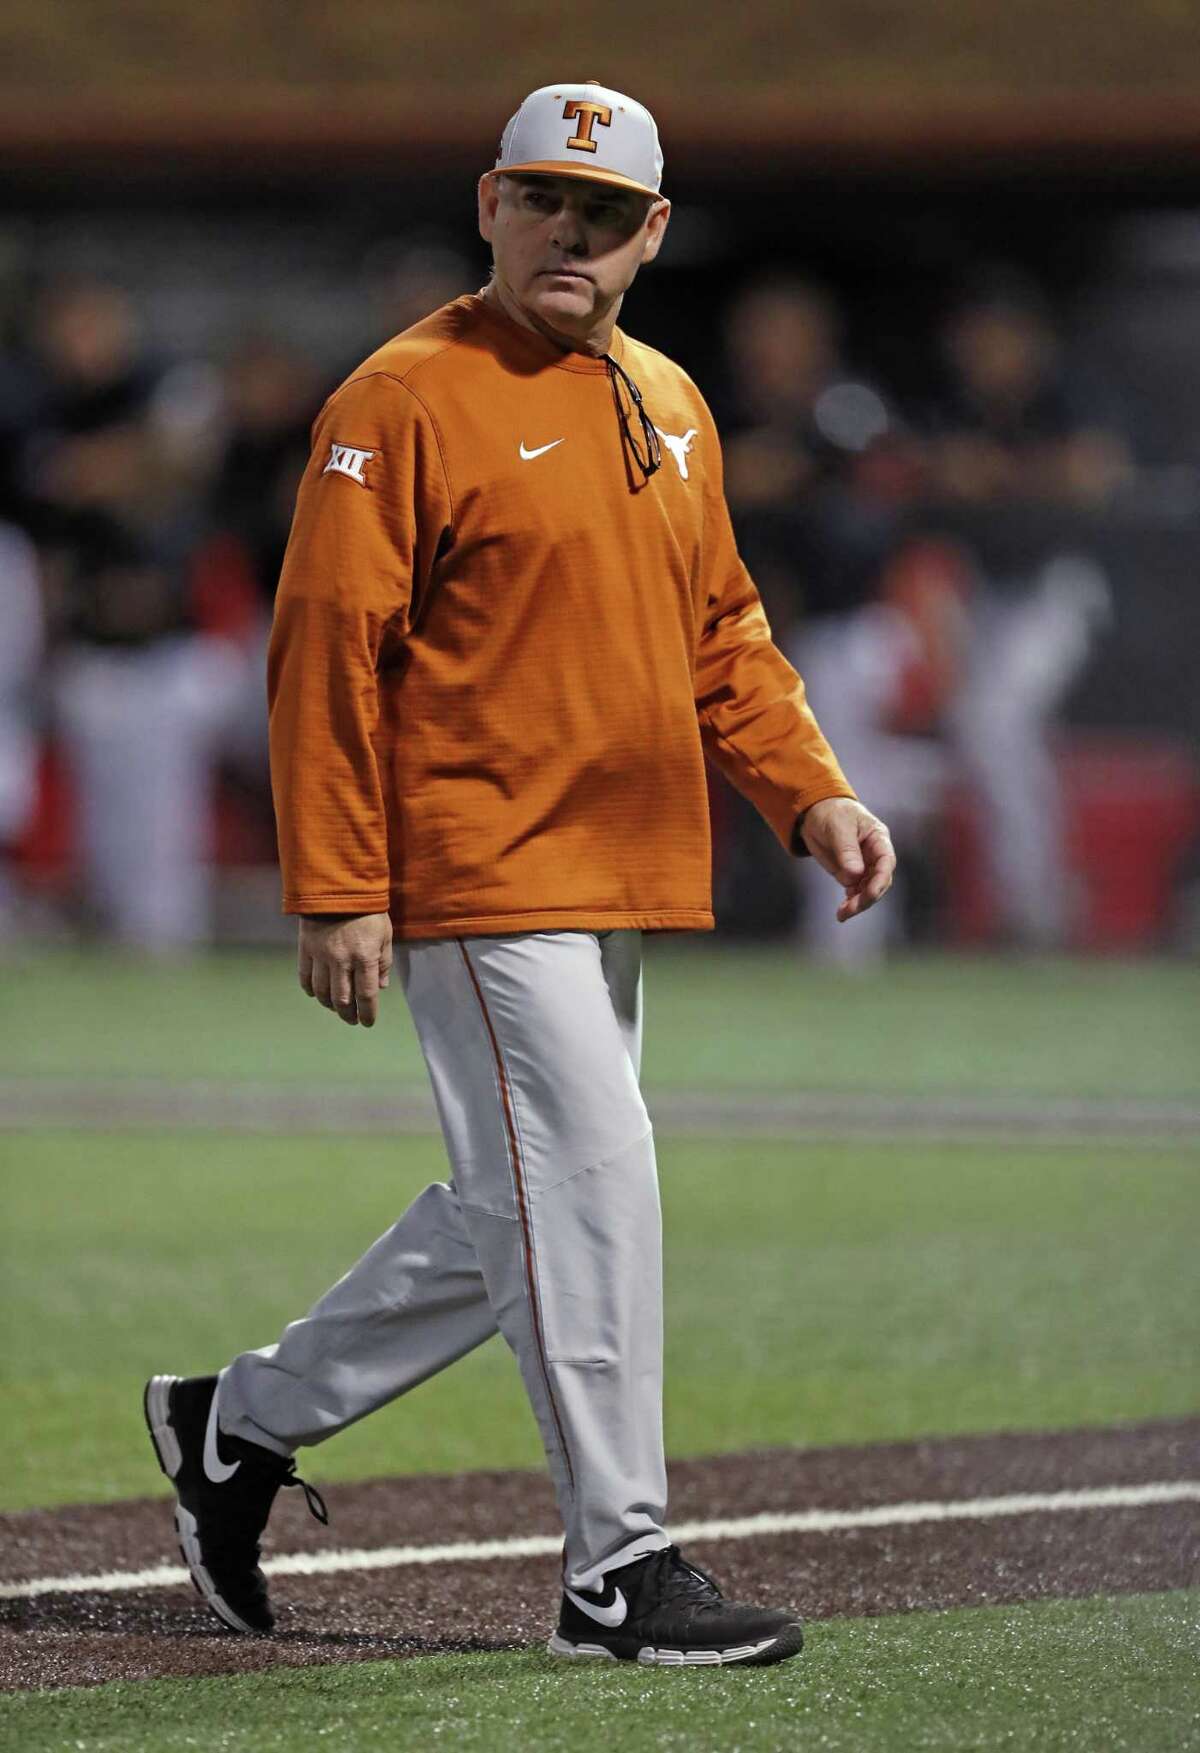 Texas coach David Pierce walks off the field during the team's game against Texas Tech on May 4 in Lubbock